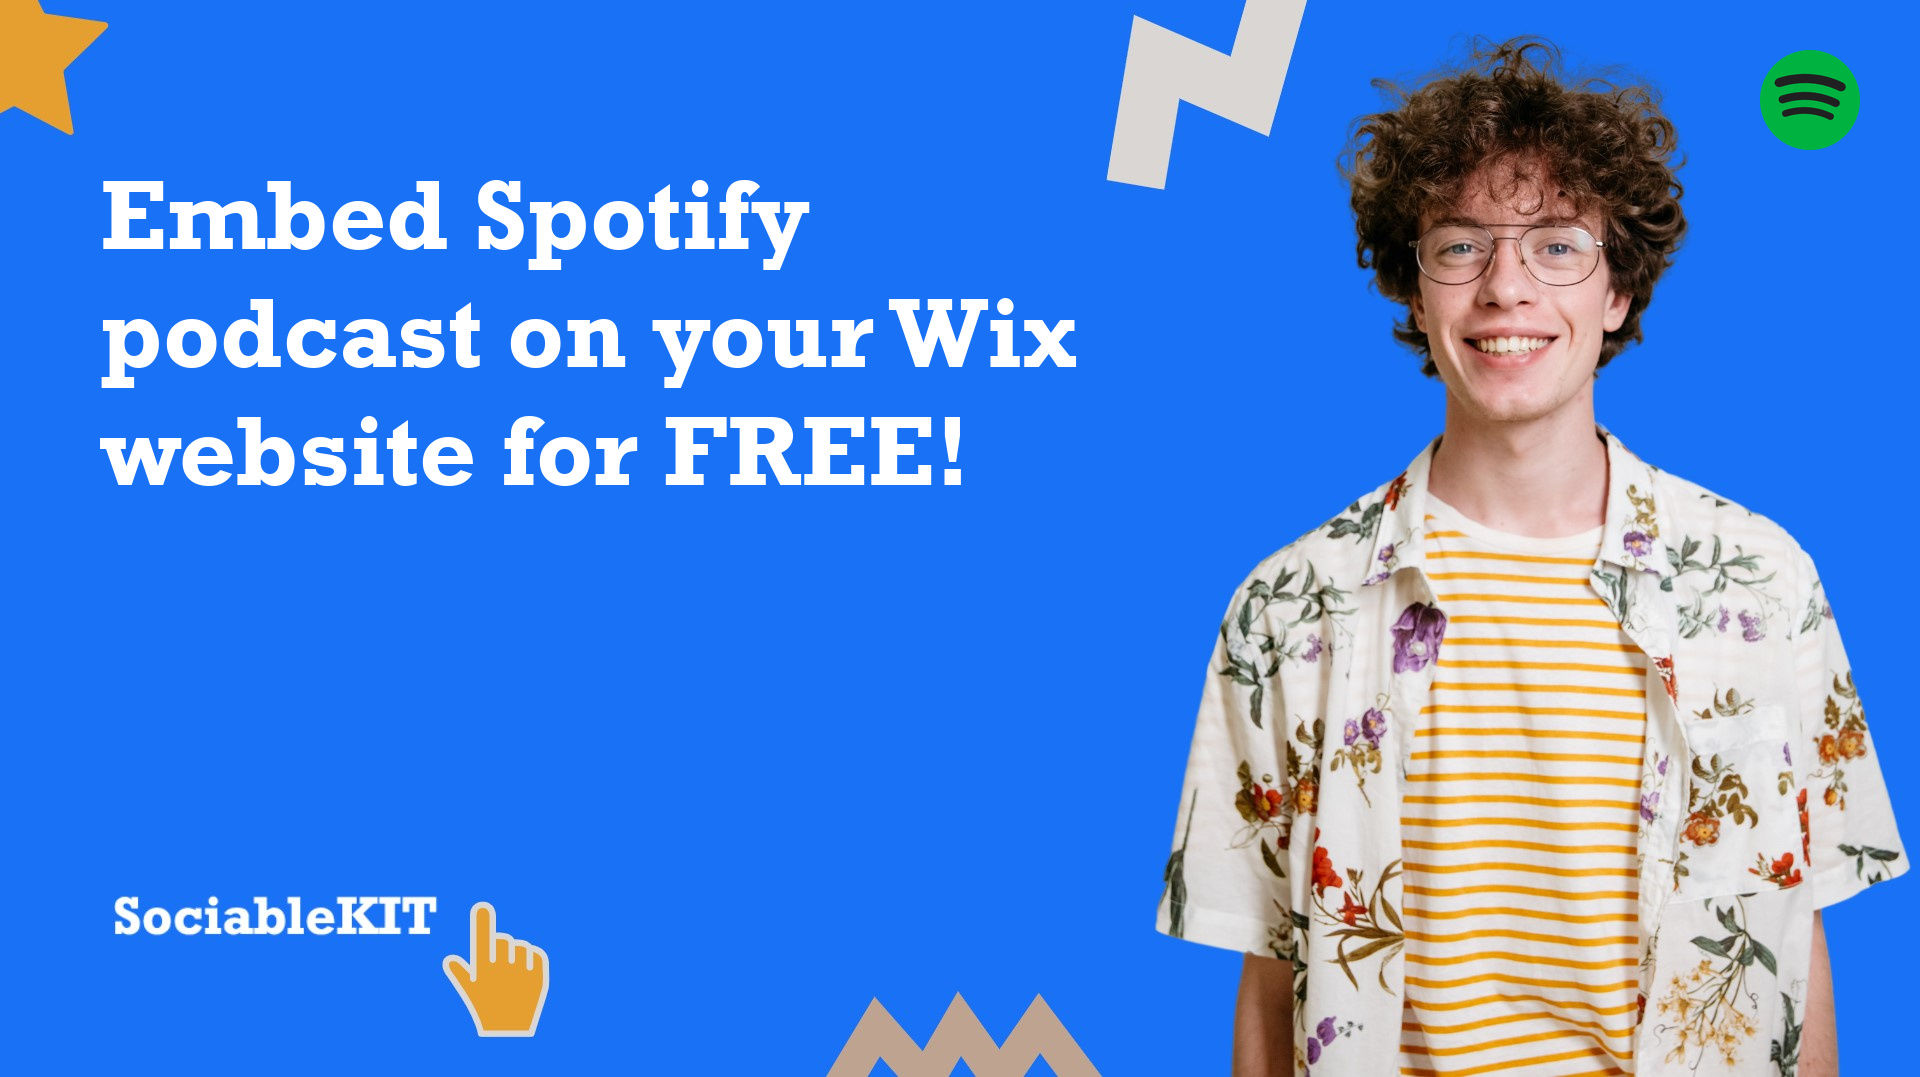 How to embed Spotify podcast on your Wix website for FREE?